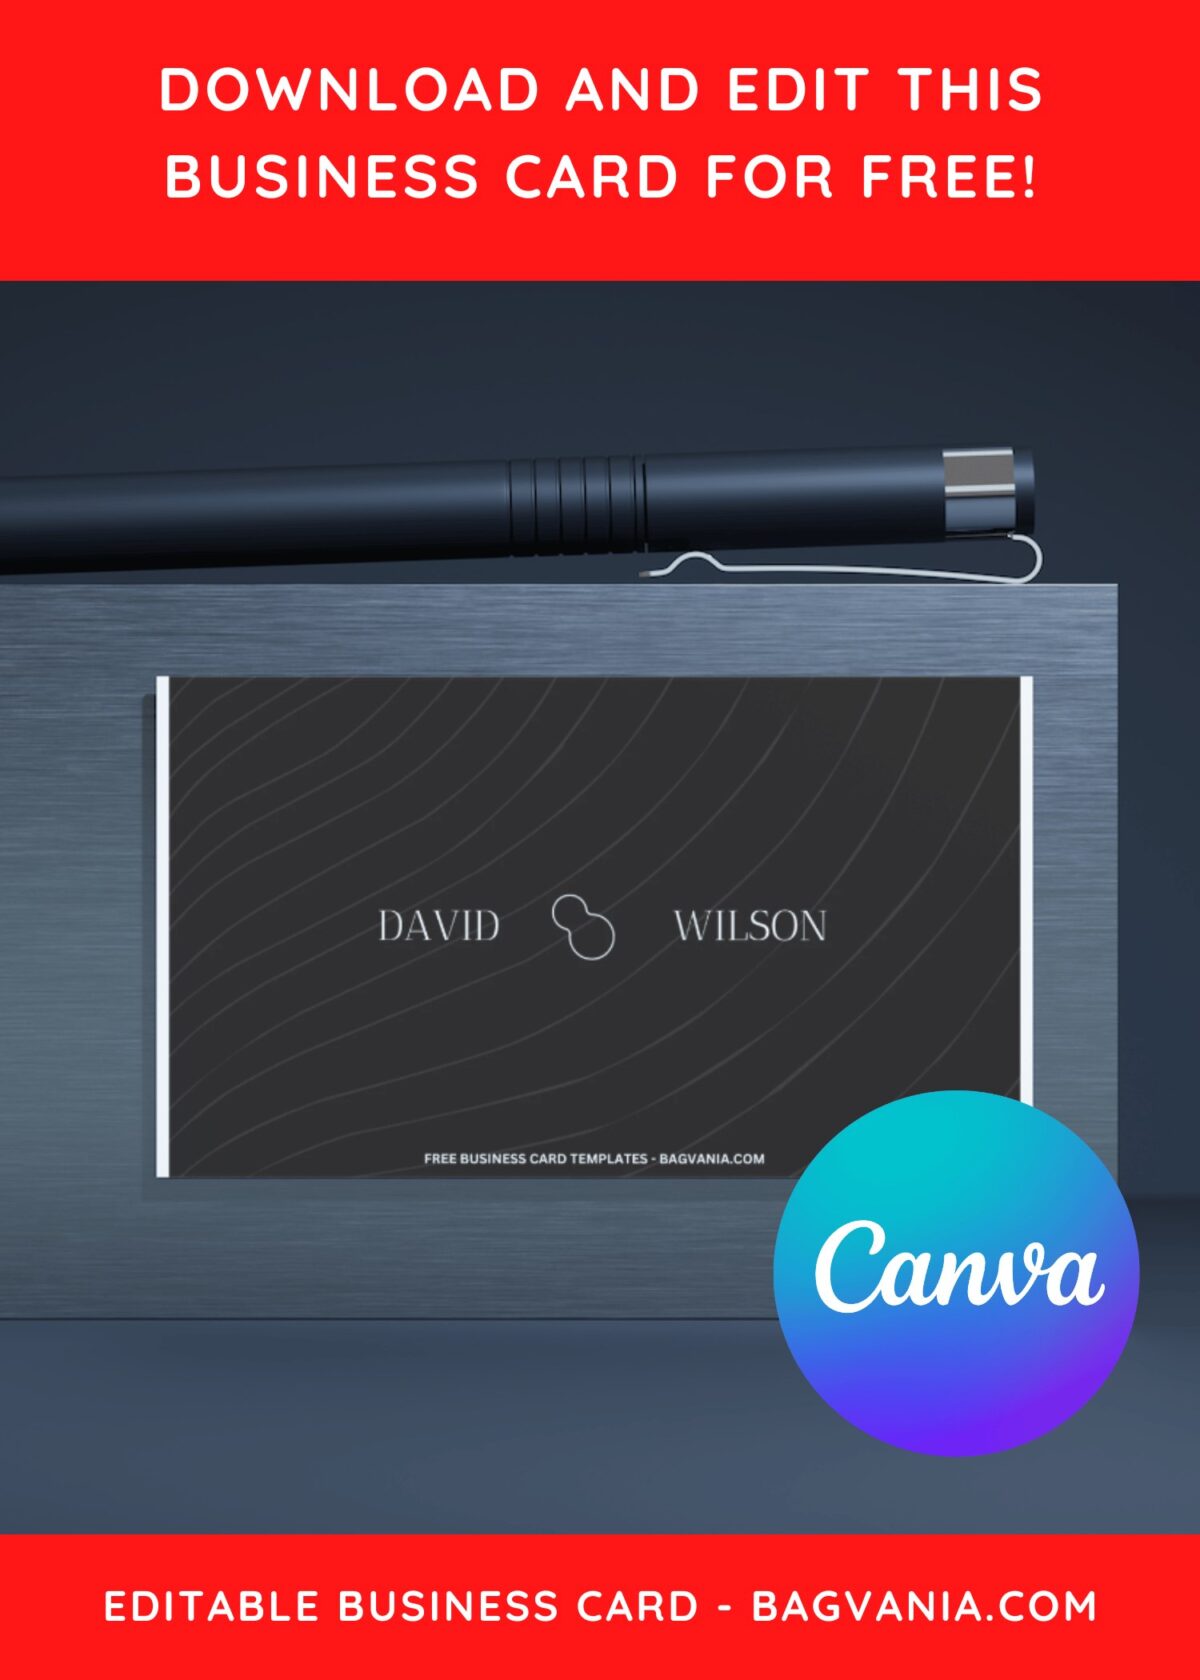 10+ Edgy Canva Business Card Templates H